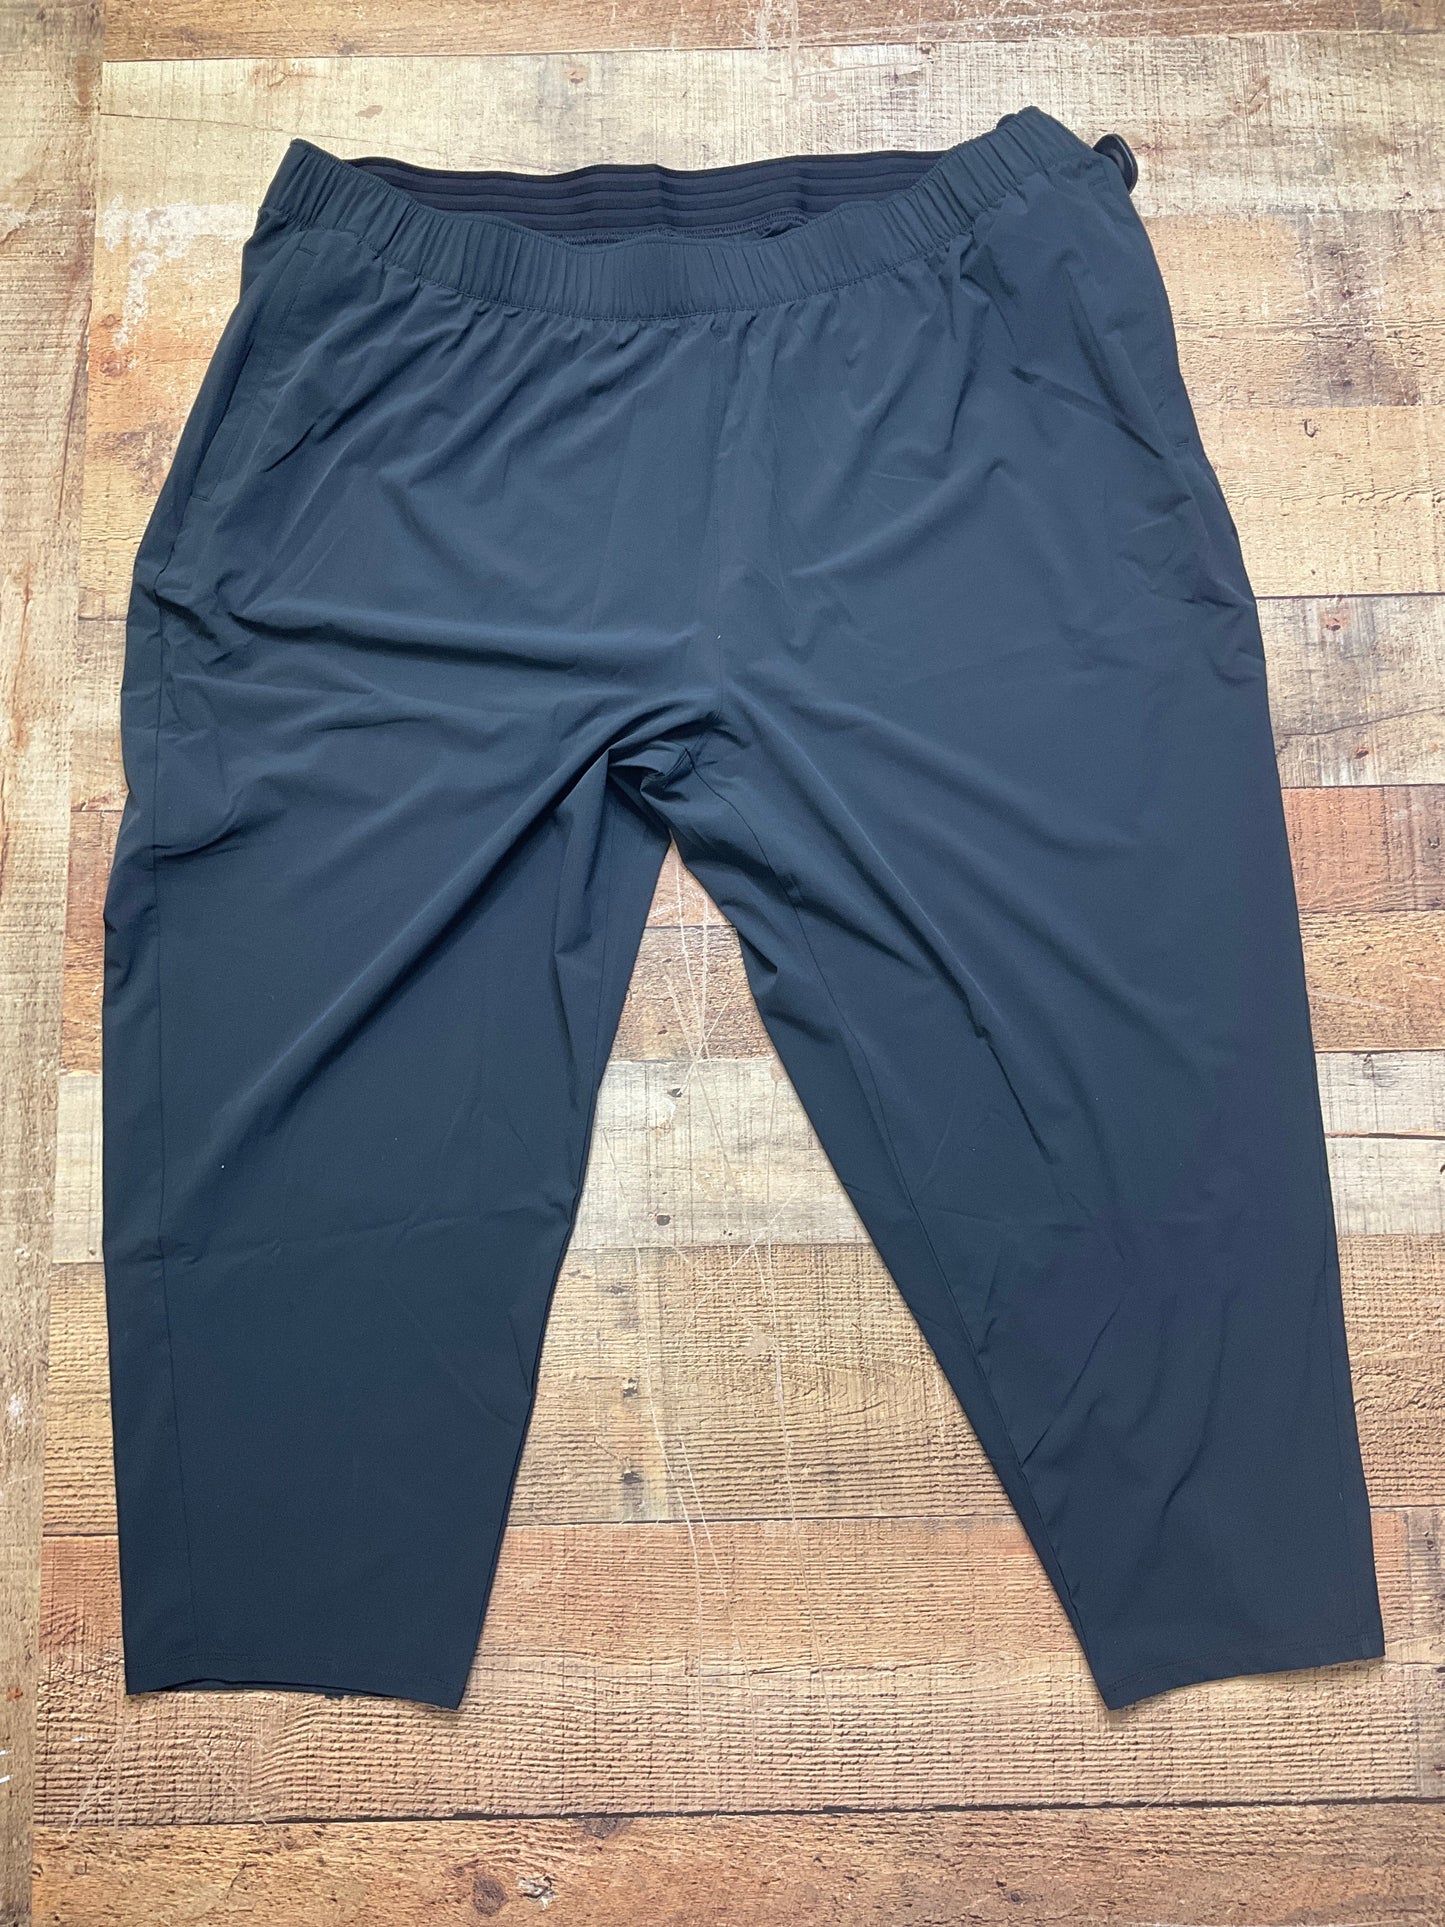 Athletic Pants By Nike Apparel  Size: 3x